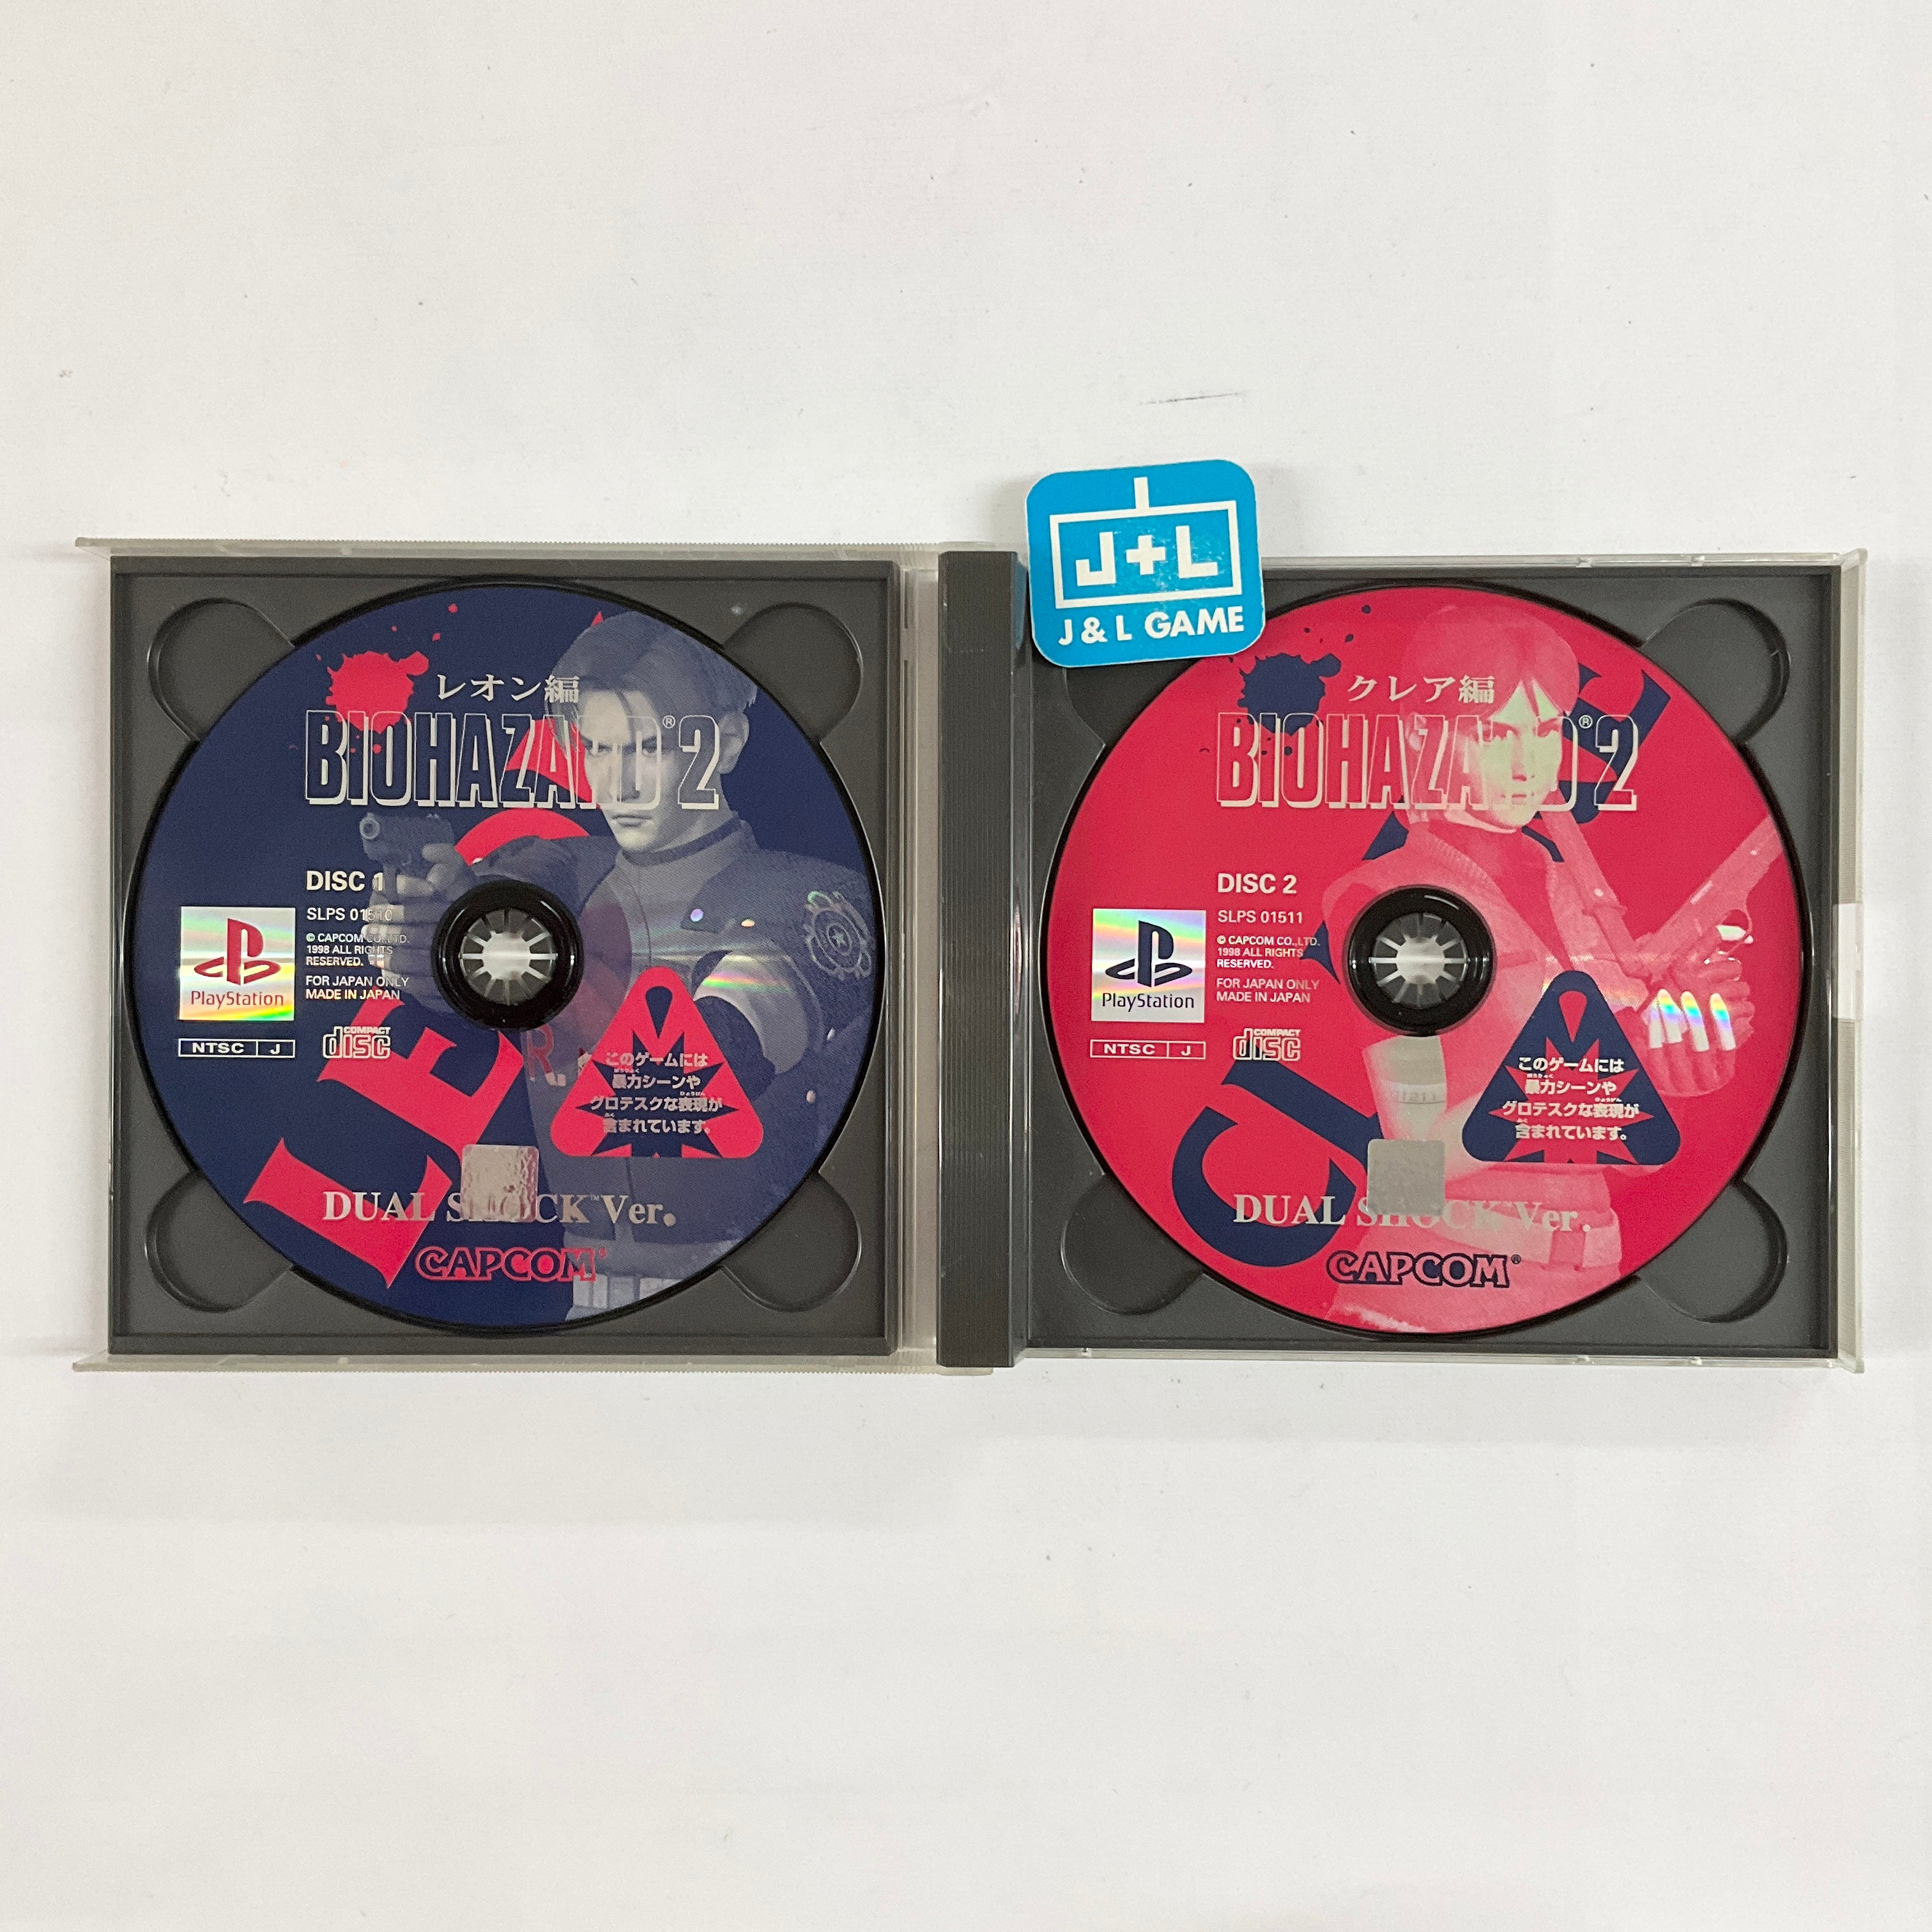 BioHazard 2 (Dual Shock Ver.) - (PS1) PlayStation 1 (Japanese Import) [Pre-Owned] Video Games Capcom   